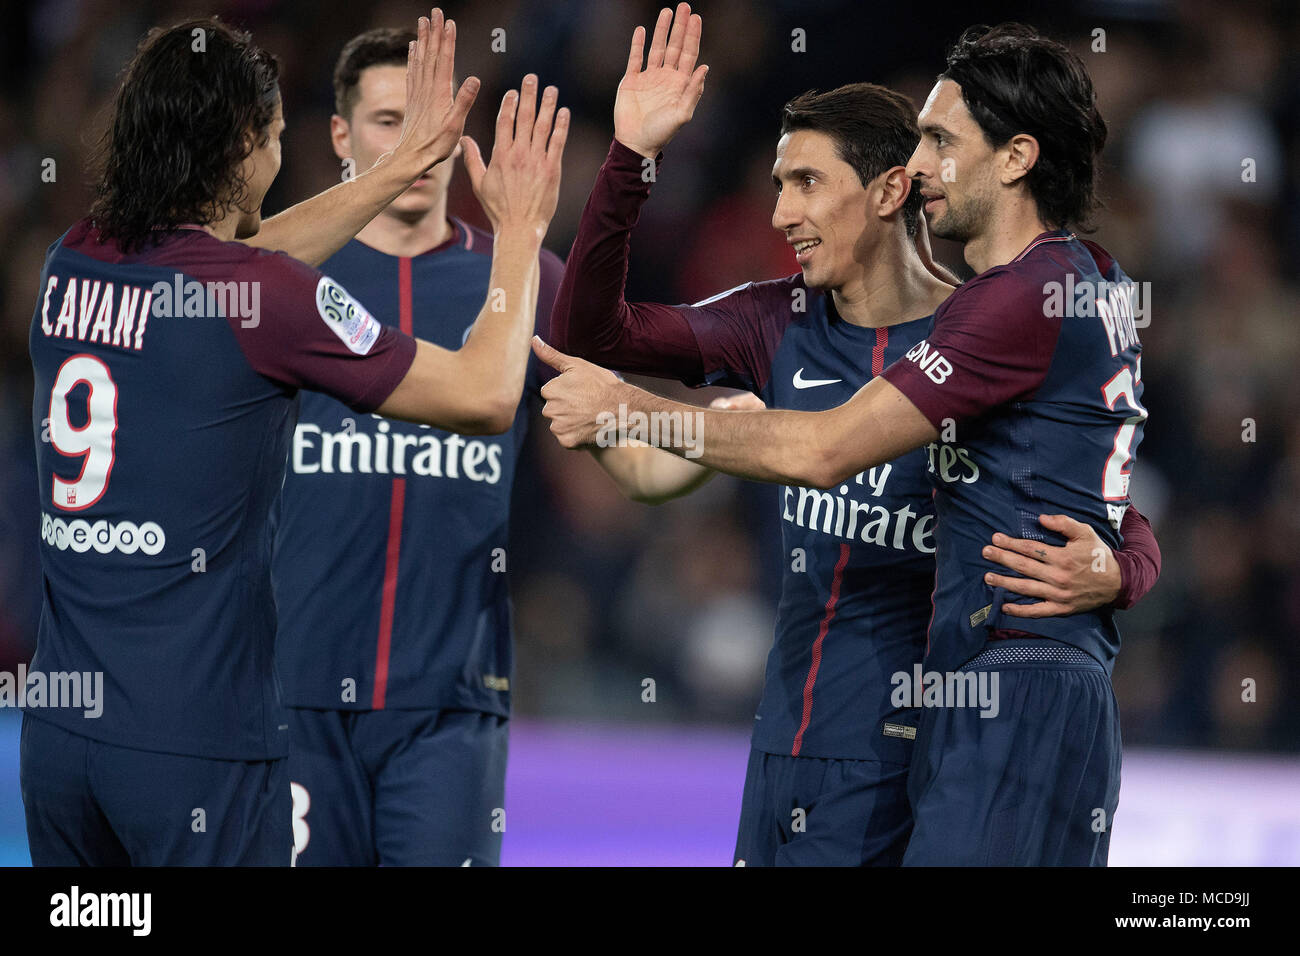 Paris, Julian Draxler and Edinson Cavani (from R to L) from Paris Saint-Germain celebrate their goal during their match against Monaco of French Ligue 1 2017-18 season 33rd round in Paris. 15th Apr, 2018. Javier Pastore, Angel Di Maria, Julian Draxler and Edinson Cavani (from R to L) from Paris Saint-Germain celebrate their goal during their match against Monaco of French Ligue 1 2017-18 season 33rd round in Paris, France on April 15, 2018. Paris Saint-Germain won Monaco with 7-1 at home and won the championship. Credit: Jack Chan/Xinhua/Alamy Live News Stock Photo